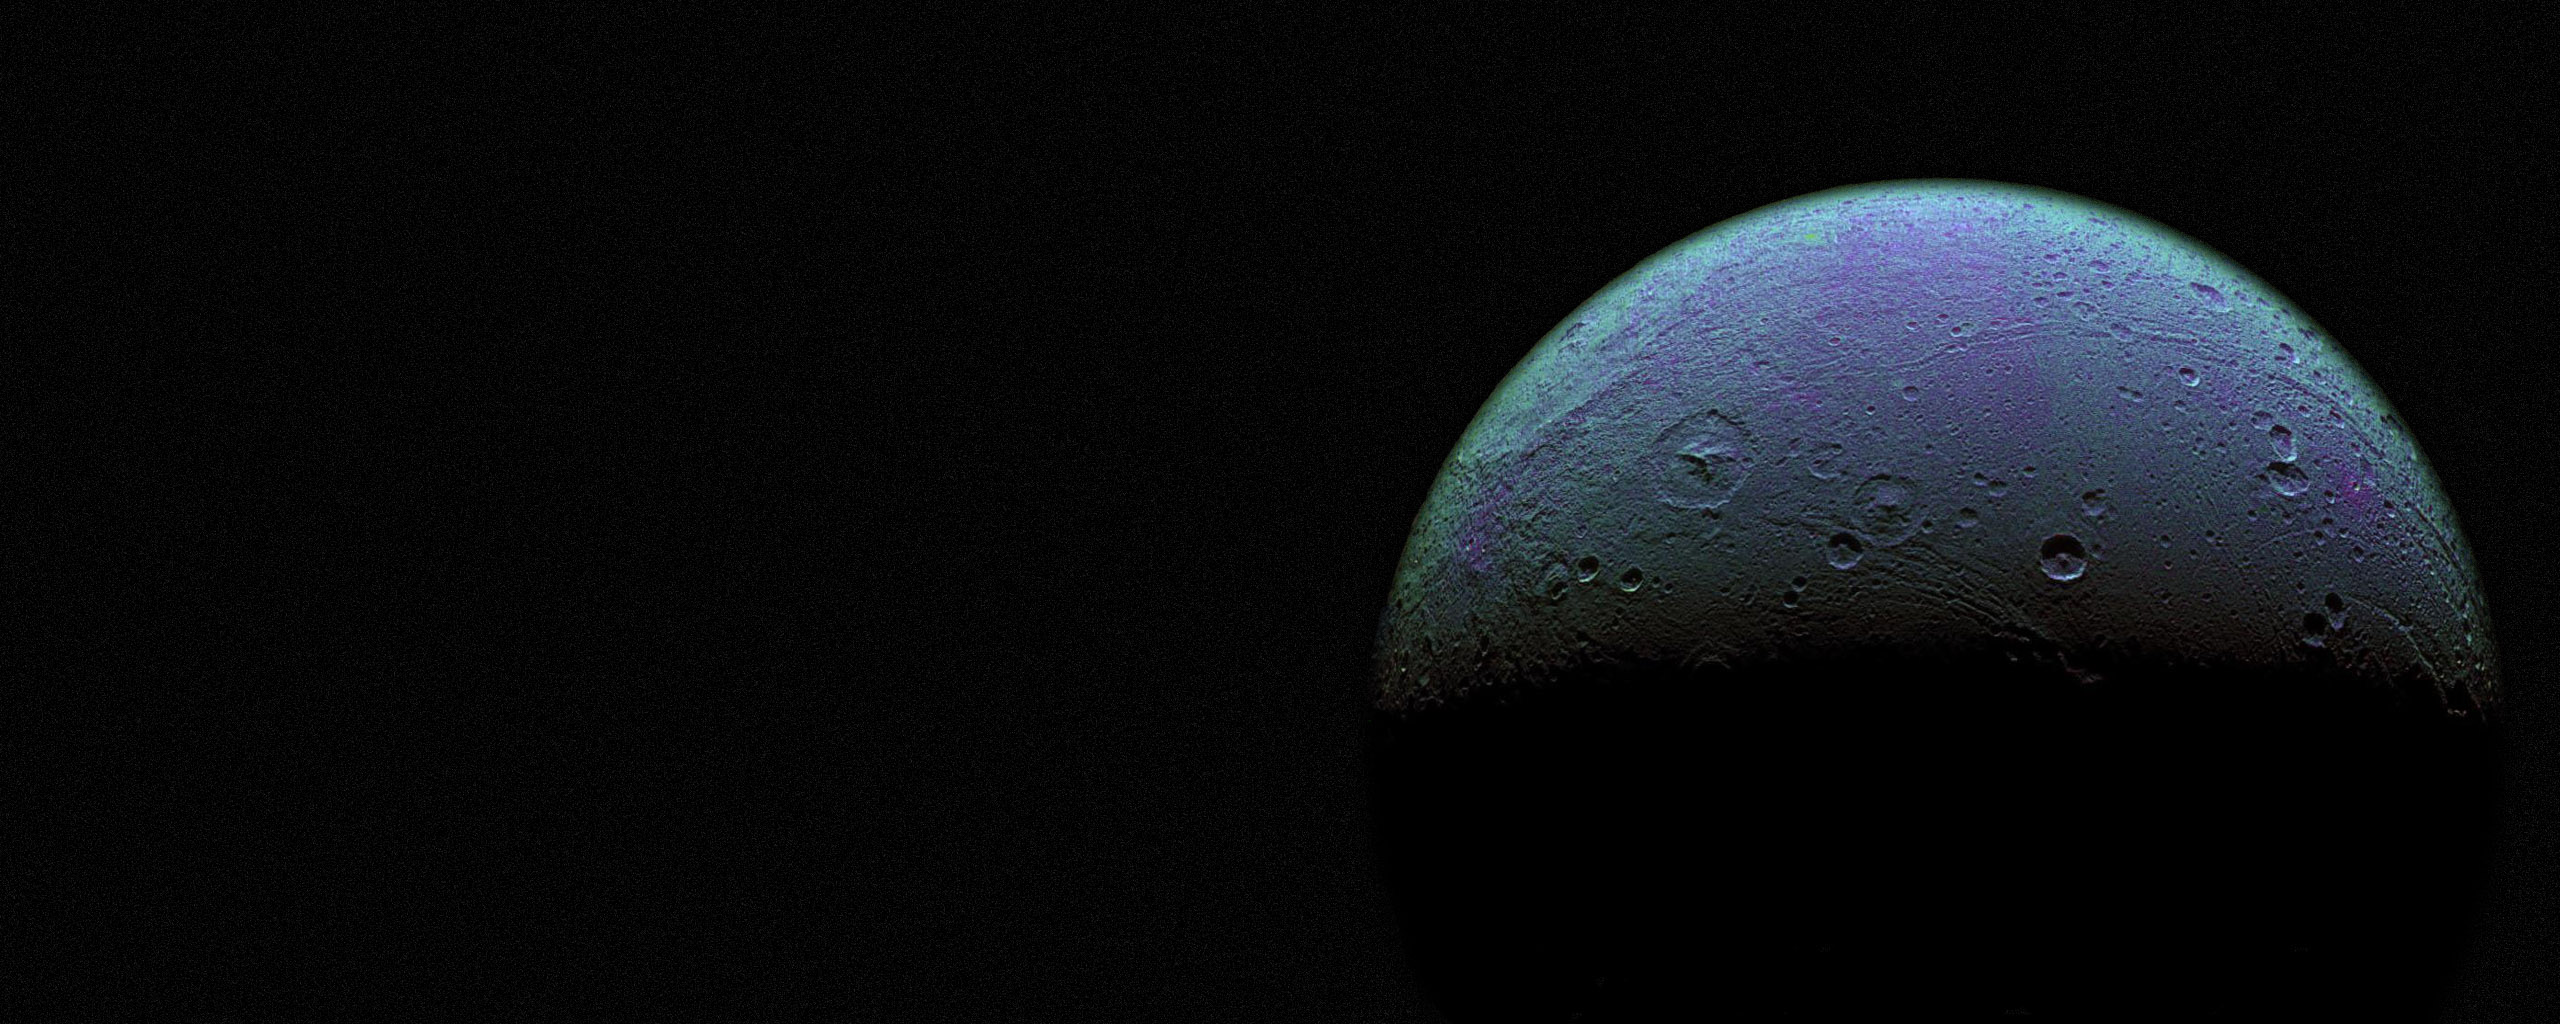 Dione Saturn S Moon Desktop And Mobile Wallpaper Wallippo